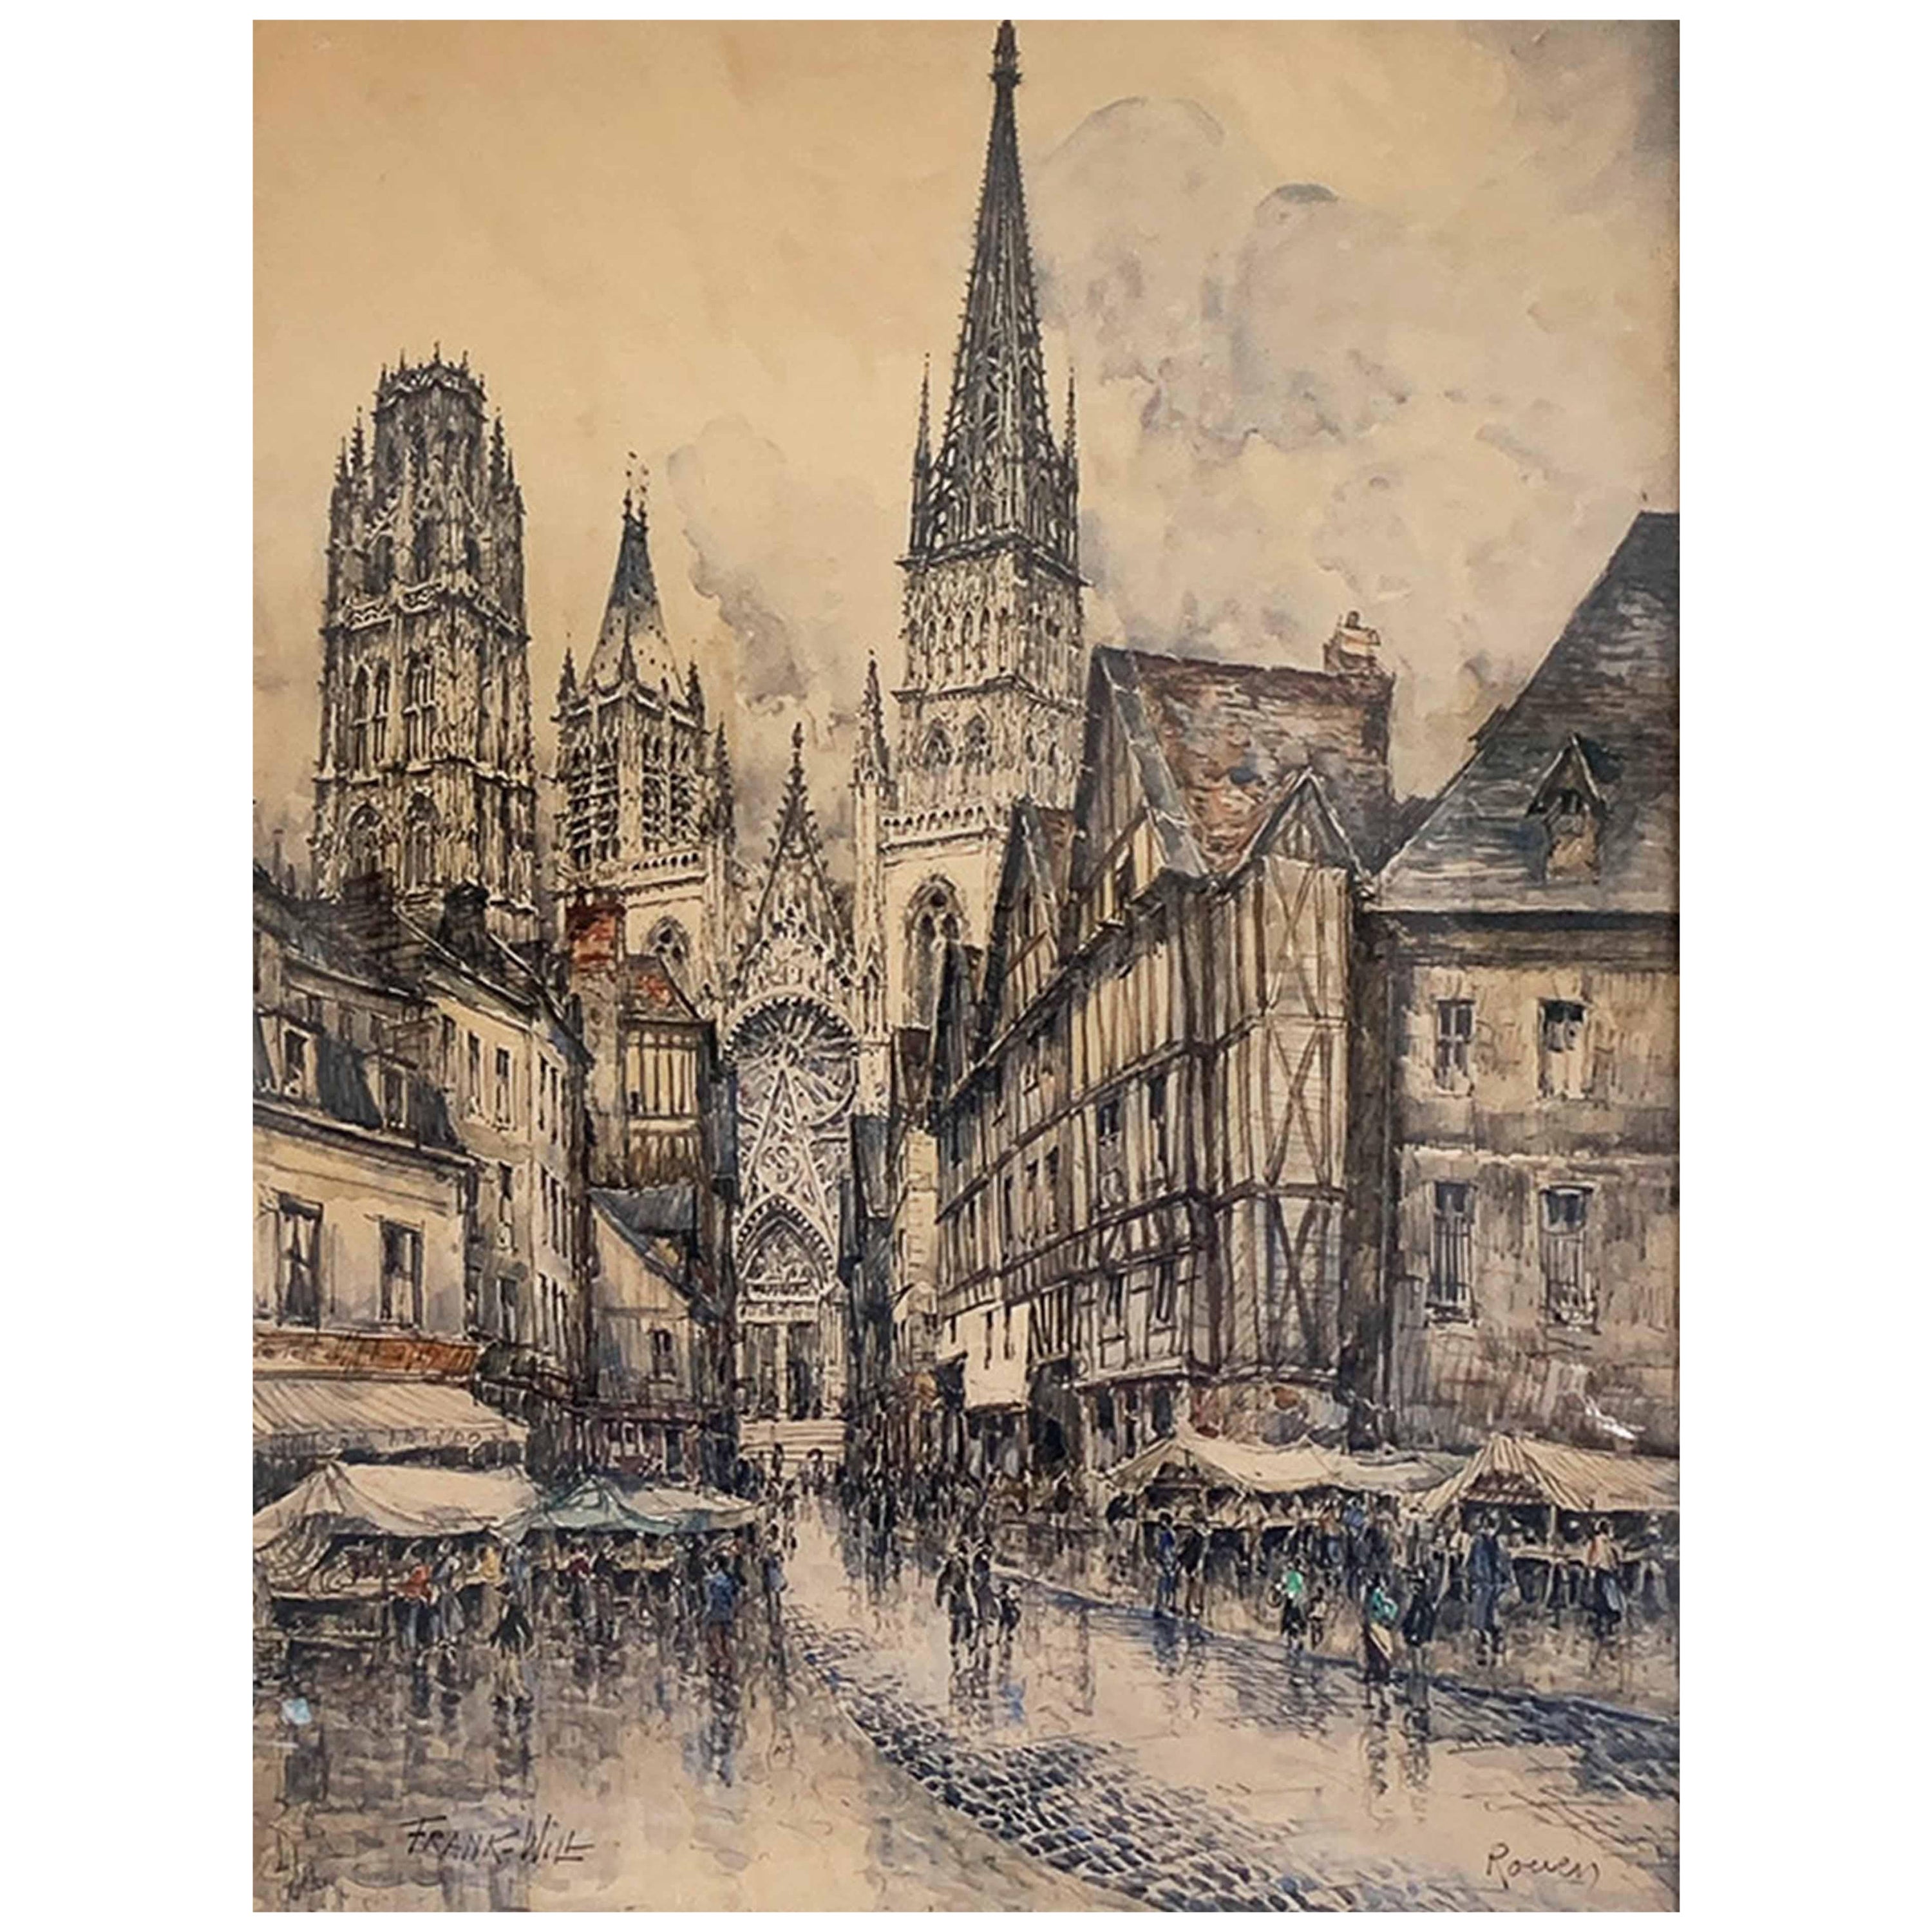 WILL Frank "Rouen", View of Notre-Dame, Watercolor For Sale